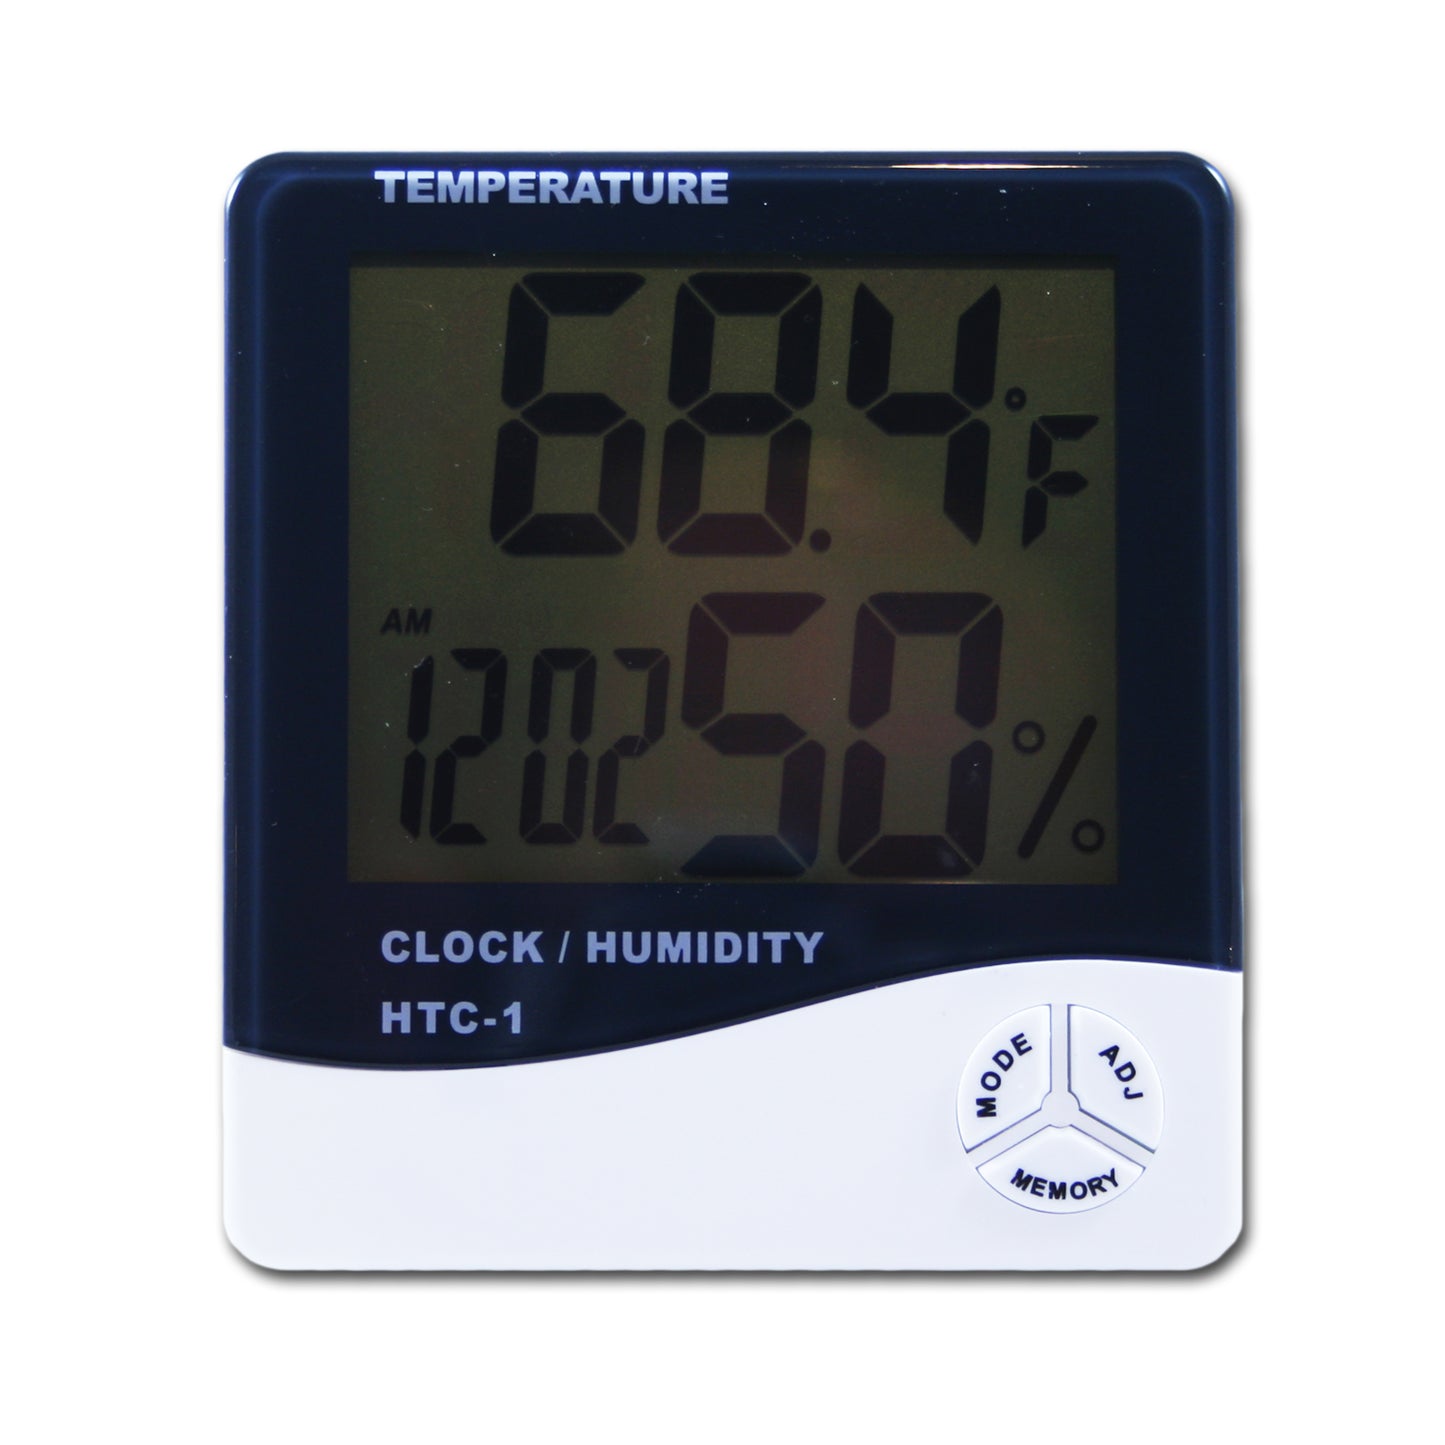 LCD Display Thermometer, Clock, and Hygrometer